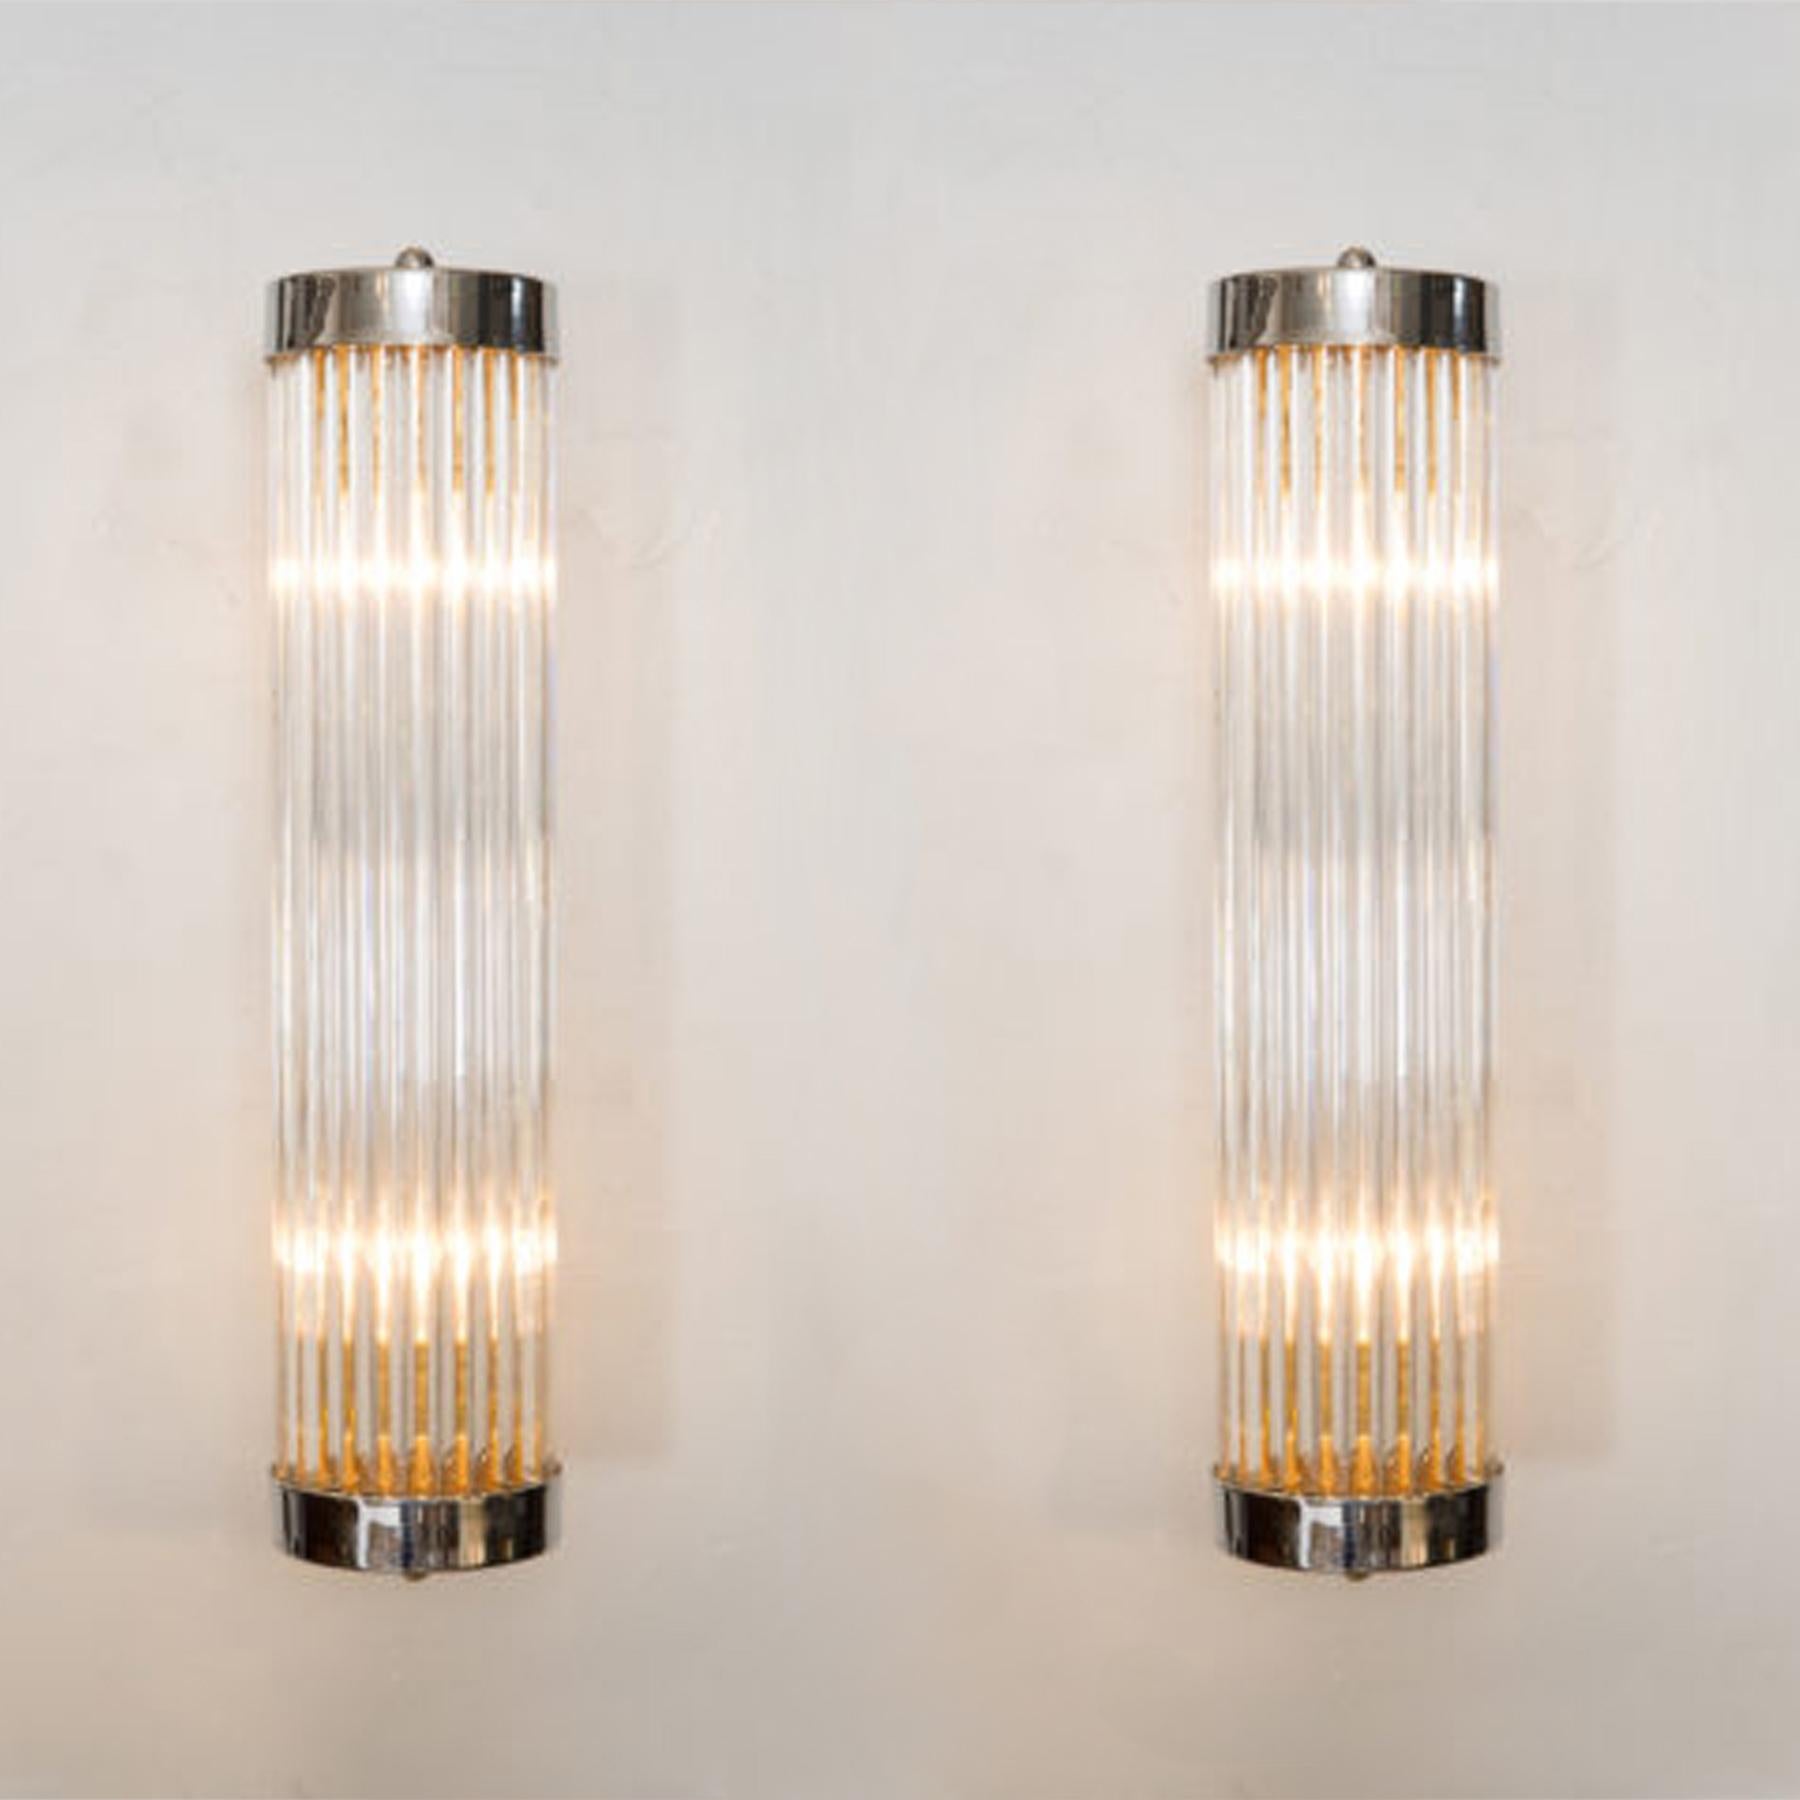 Contemporary Art Deco inspired Italian wall lights in the style of ‘Venini’.
Each light comprises of a circle of slim Murano glass rods capped top and bottom by round brass plates that attach with two slim brass arms to a brass wall bracket.
Two